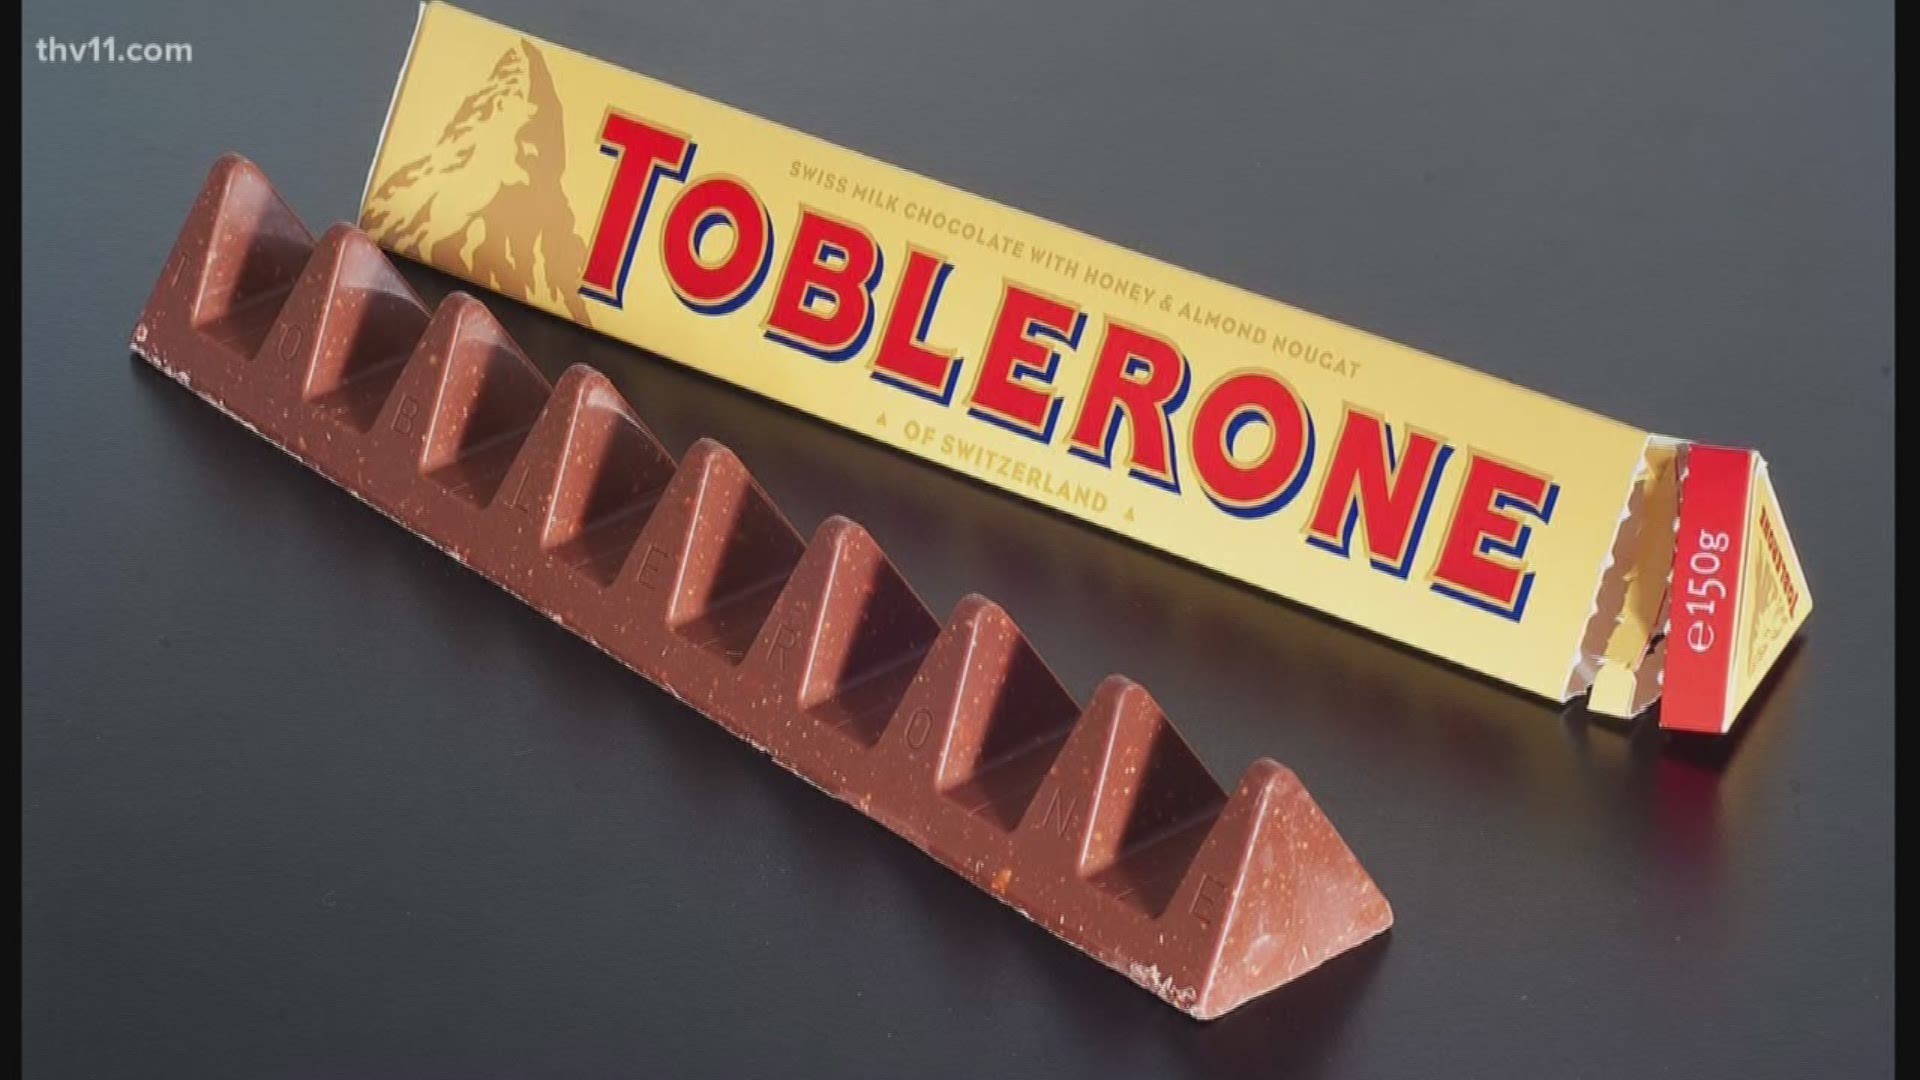 THE TUNNEL REFERS TO A GAP NEAR THE TOP OF A WOMAN'S THIGHS RESEMBLING A TRIANGULAR SHAPE SIMILAR TO A TOBLERONE CANDY BAR.